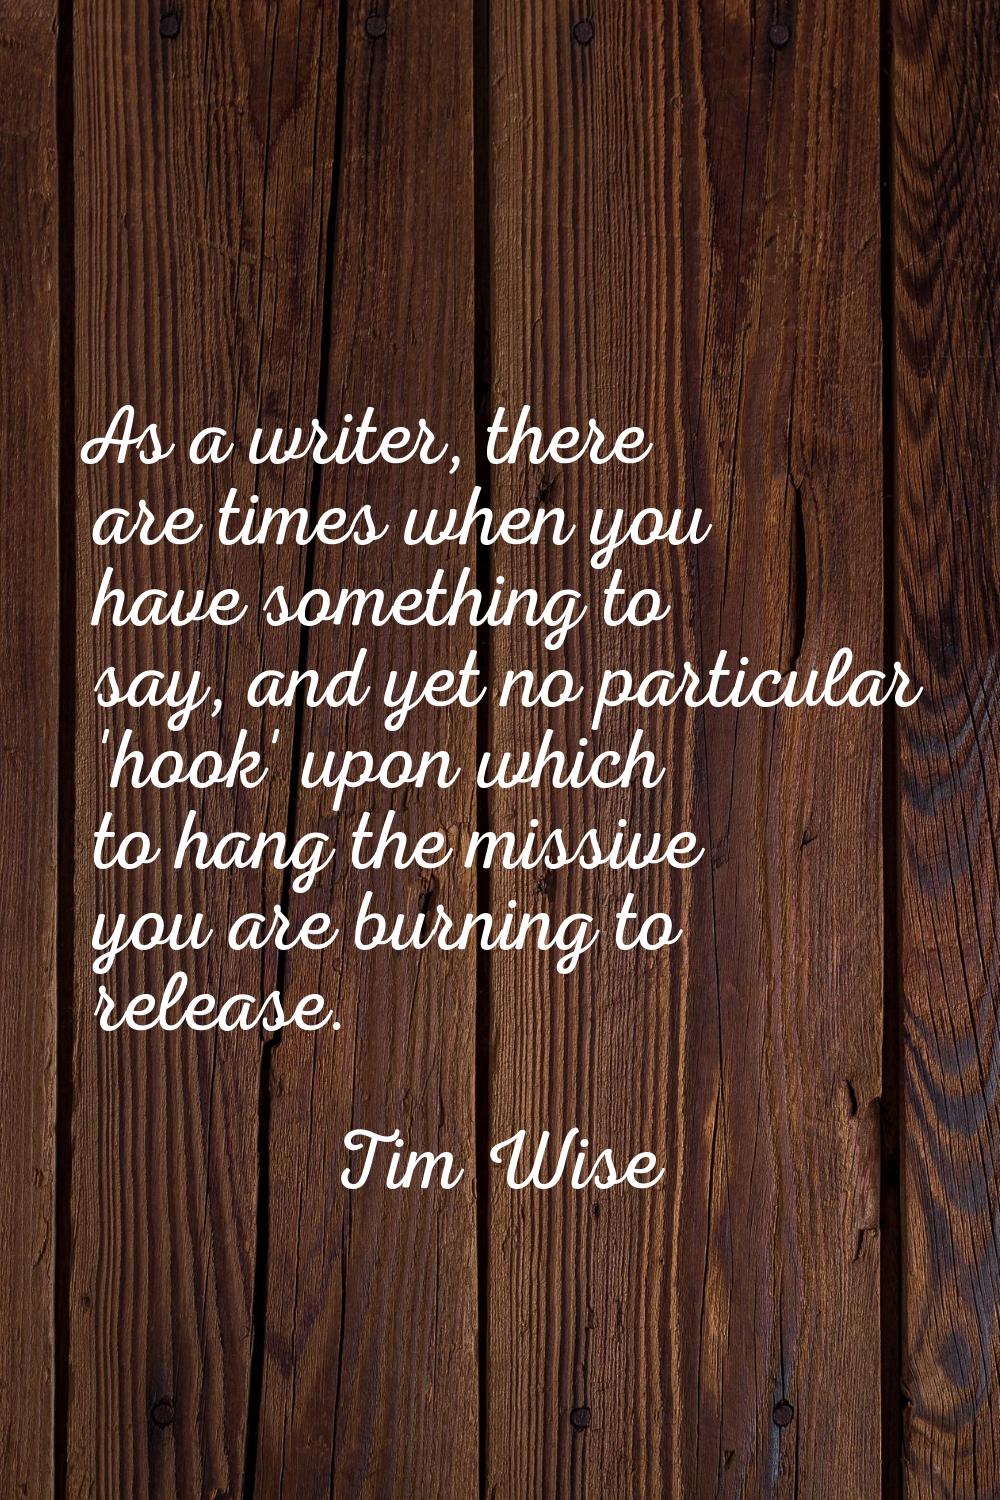 As a writer, there are times when you have something to say, and yet no particular 'hook' upon whic